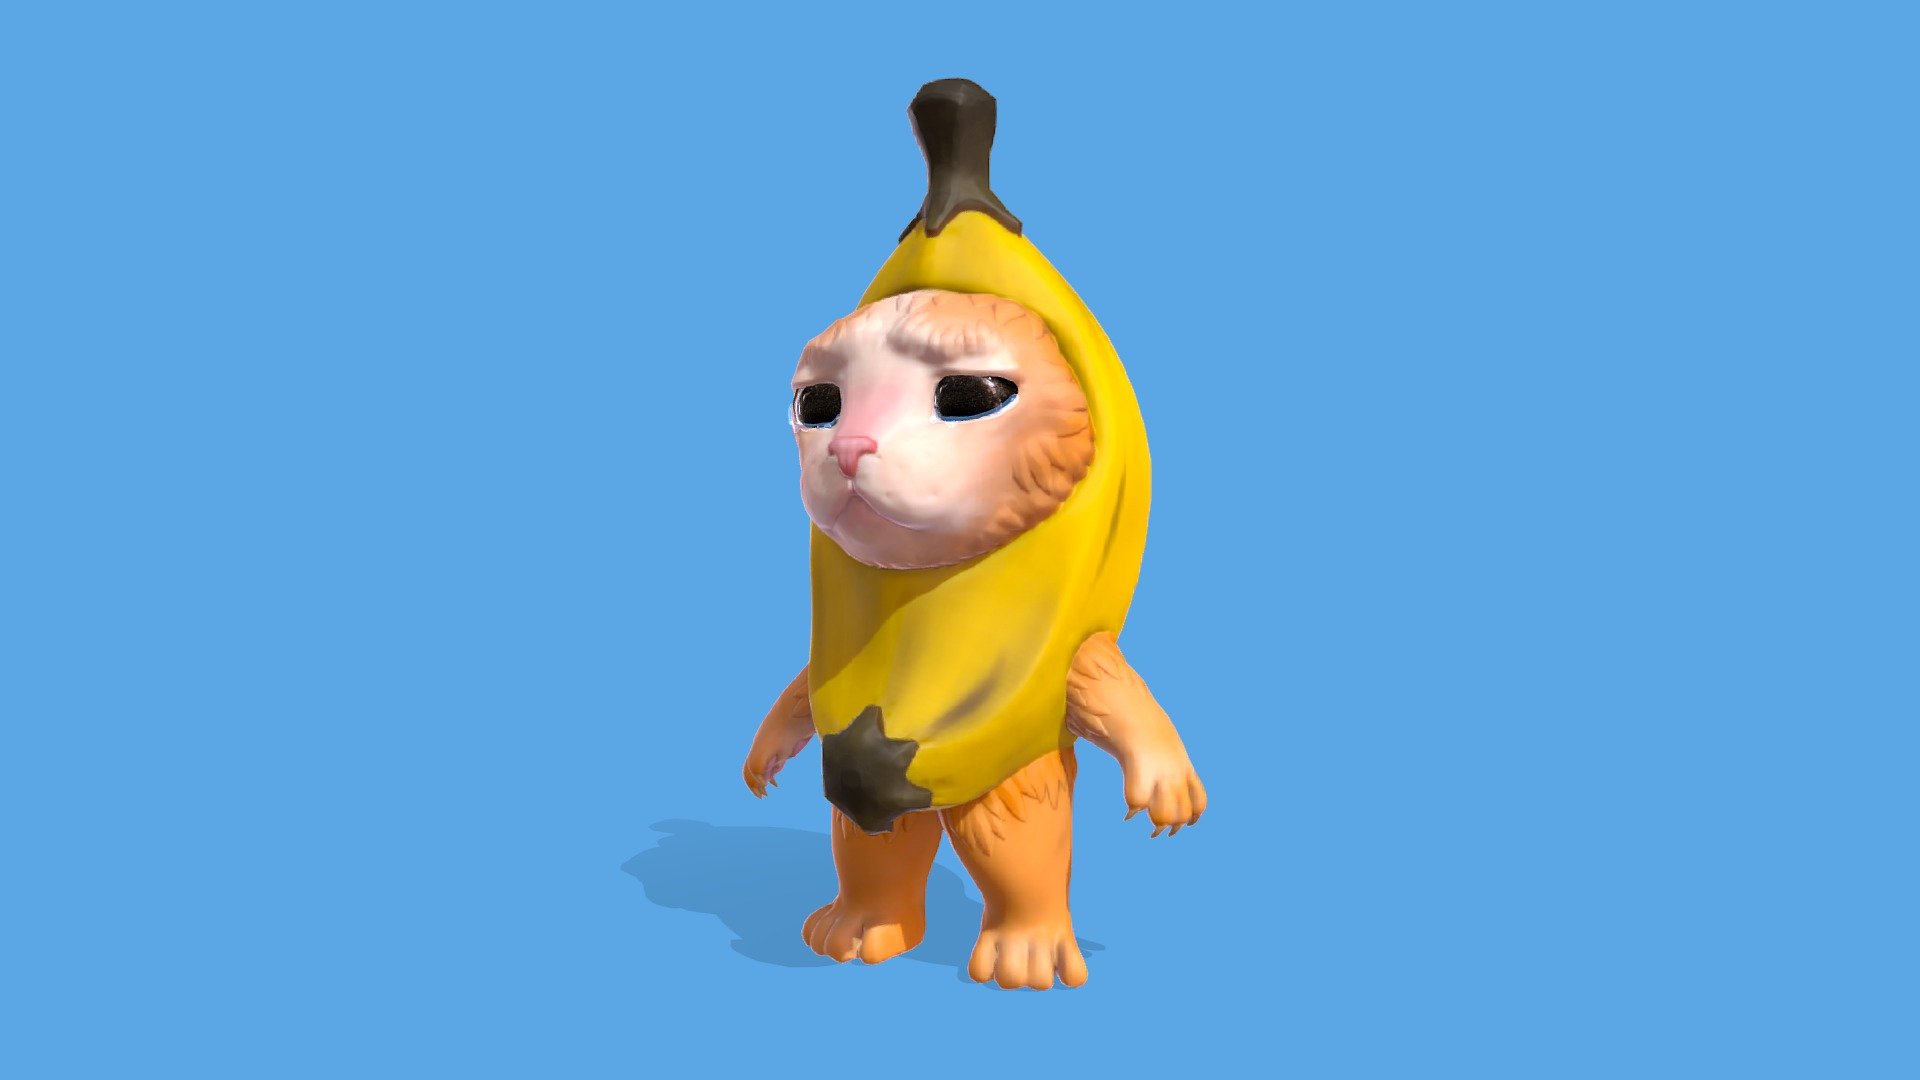 Introducing my latest 3D creation: a beautifully sad cat in a banana suit. This meme-inspired character has tearful eyes that express deep sorrow, contrasted by the humorous banana suit. With intricate details and stylized textures, this model pays tribute to internet culture.

Package include : 
- FBX low poly model with textures 2048x2048 (Base, Normal, AO)




STL model for 3d printing with separeted parts

Some Renders:



STL Model: 
 - Puss in banana suit 3D model - Download Free 3D model by Wnight 3d model